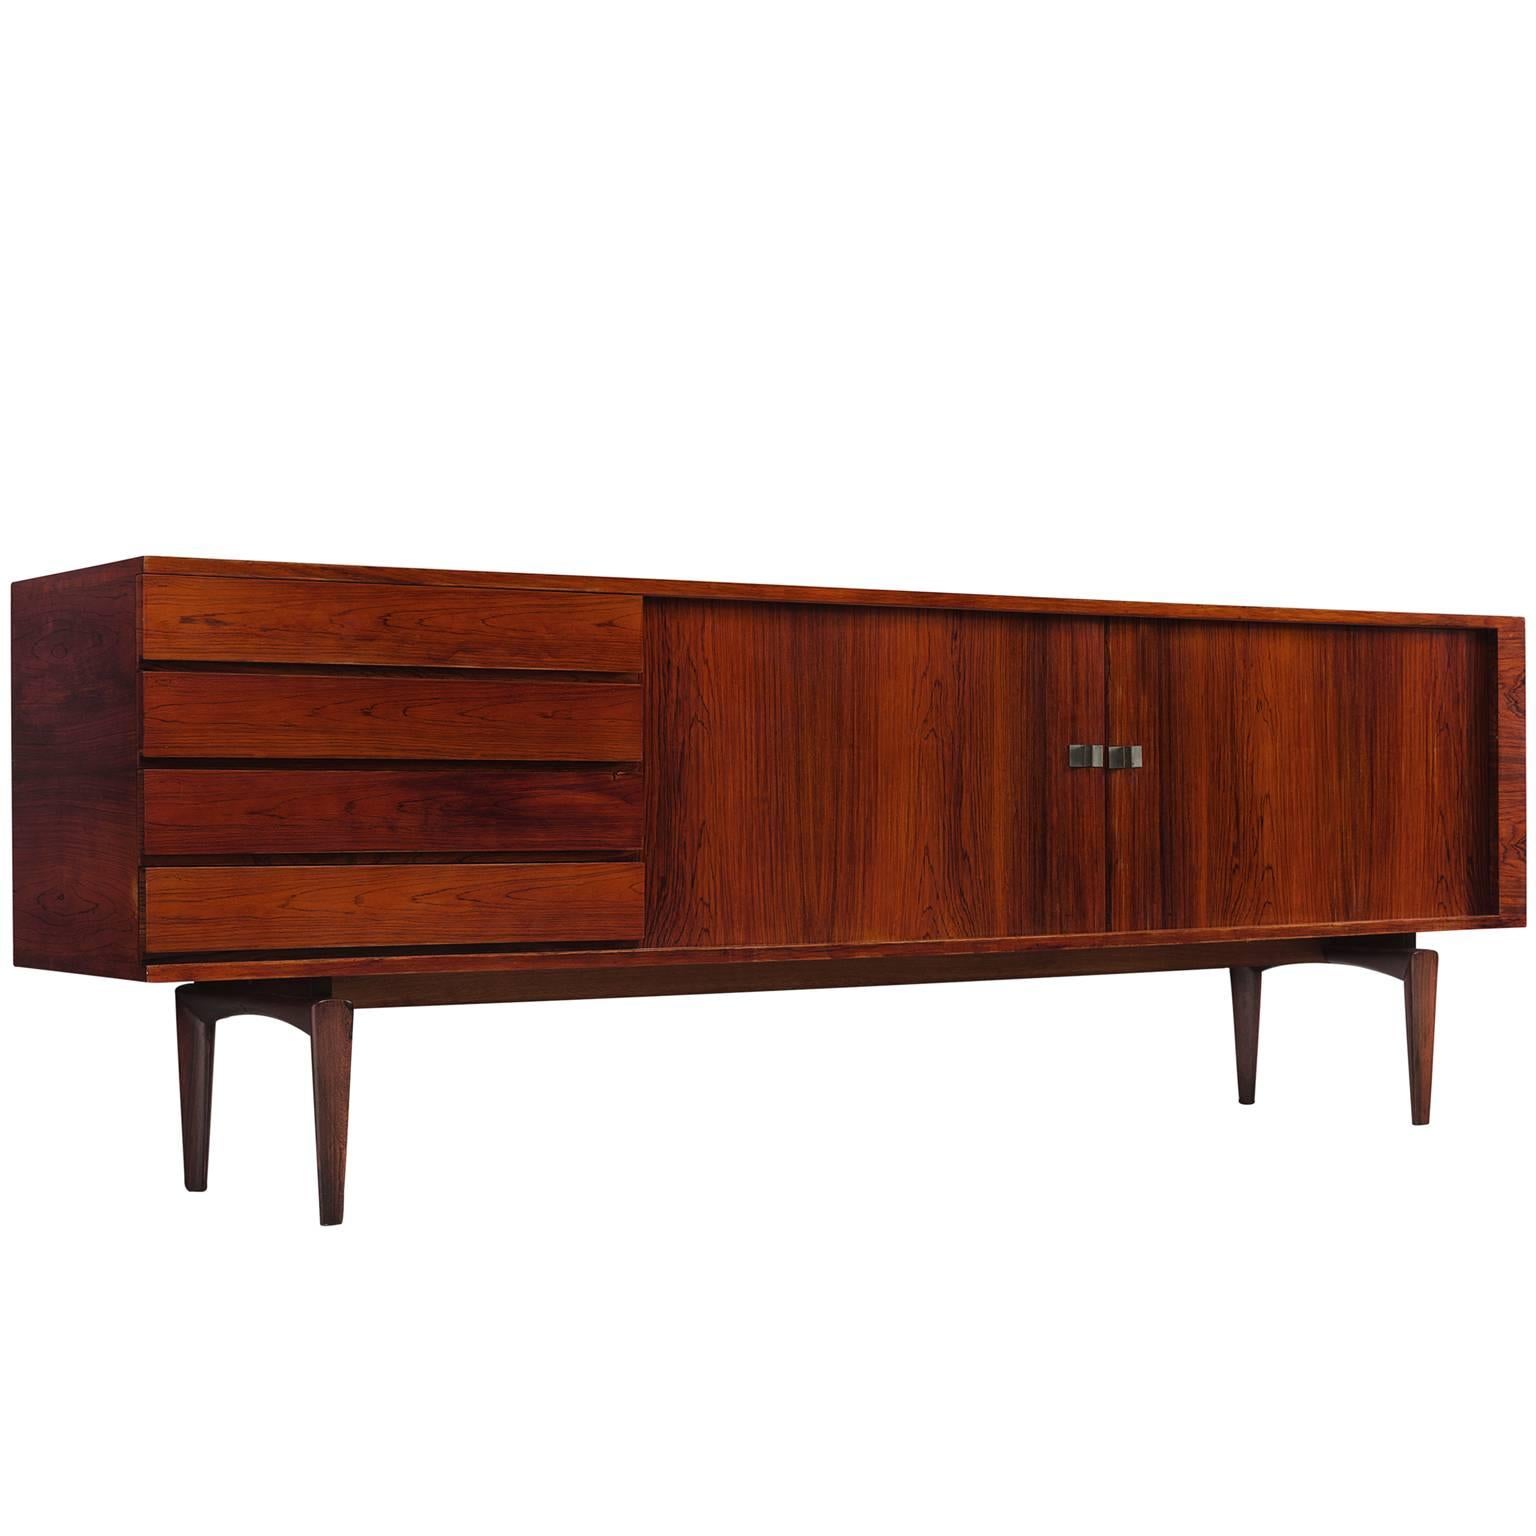 H.W. Klein Sideboard in Rosewood